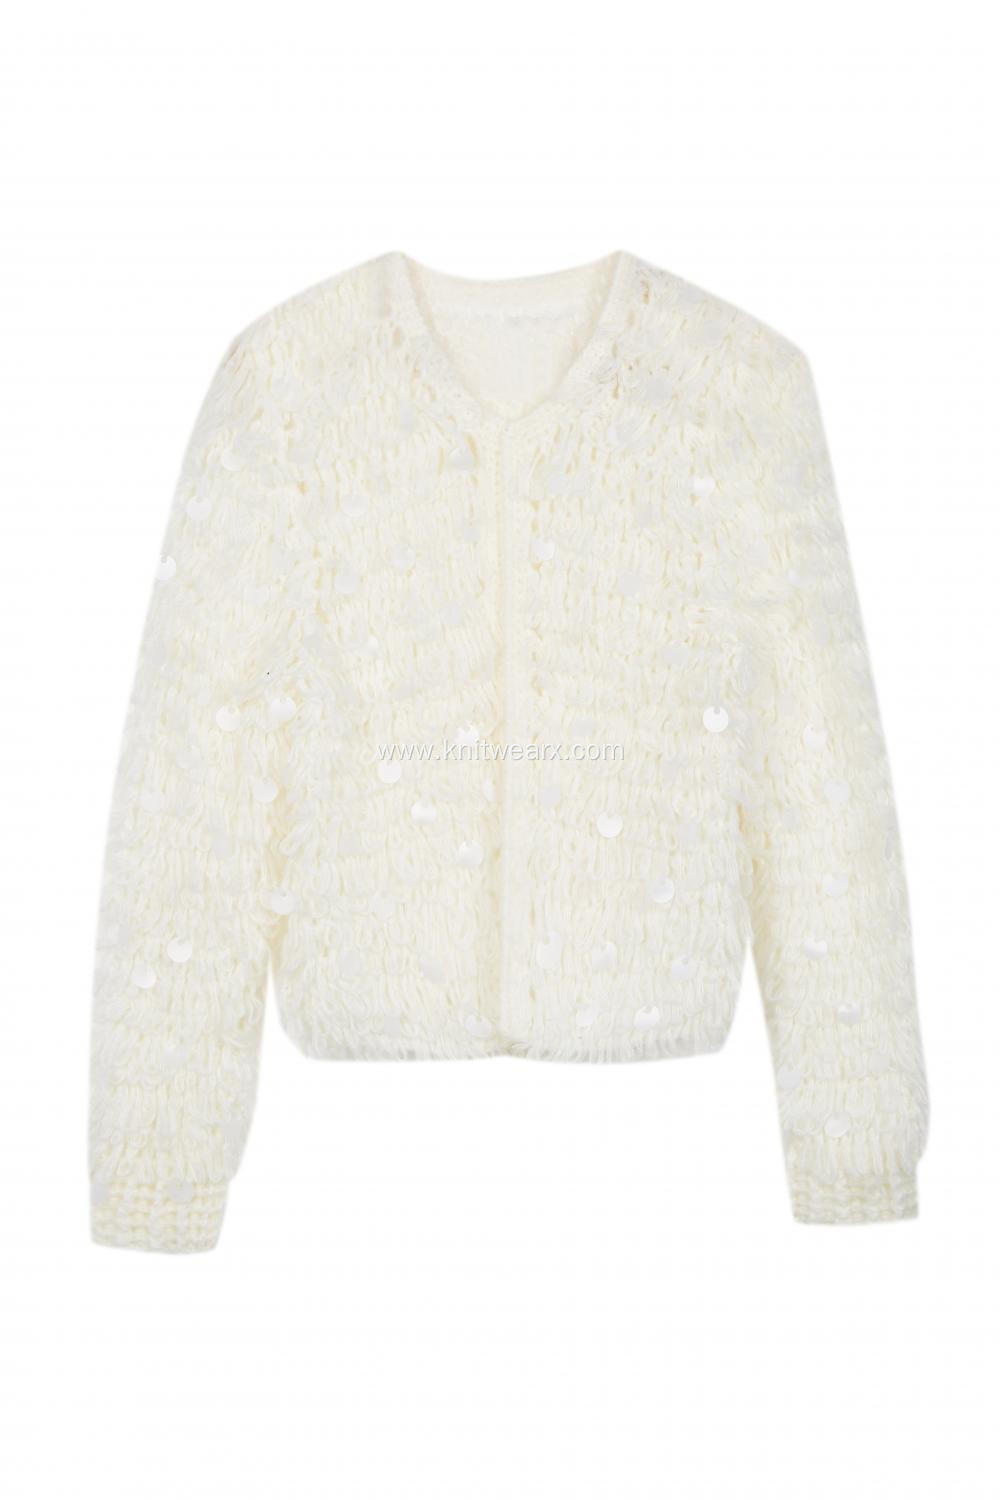 Women's Knitted Sequins Crochet Chunky Cardigan